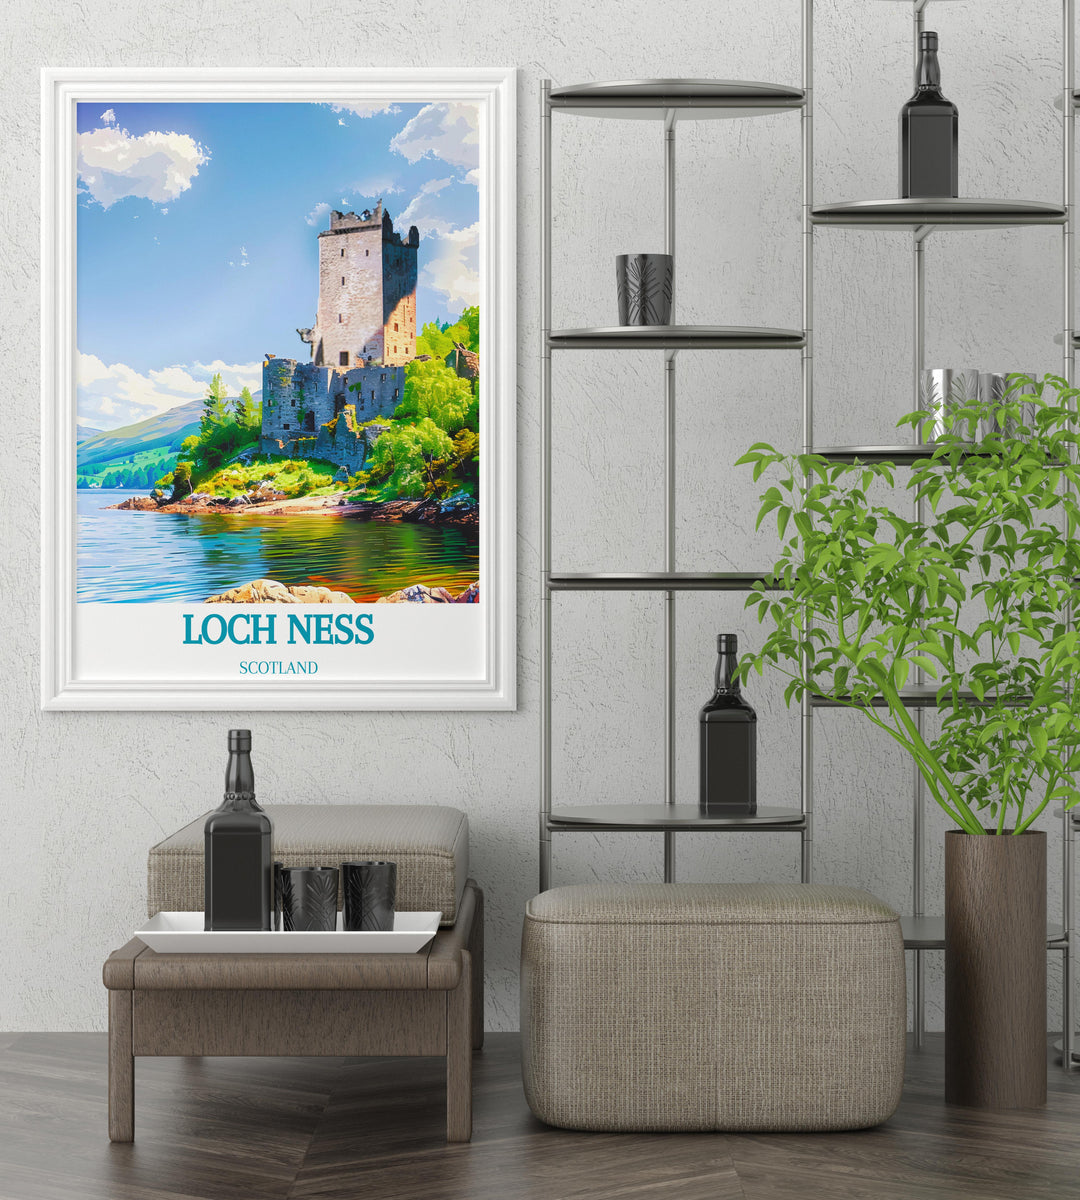 Detailed print of Urquhart Castles ruins, ideal for adding a historical element to your home or office.